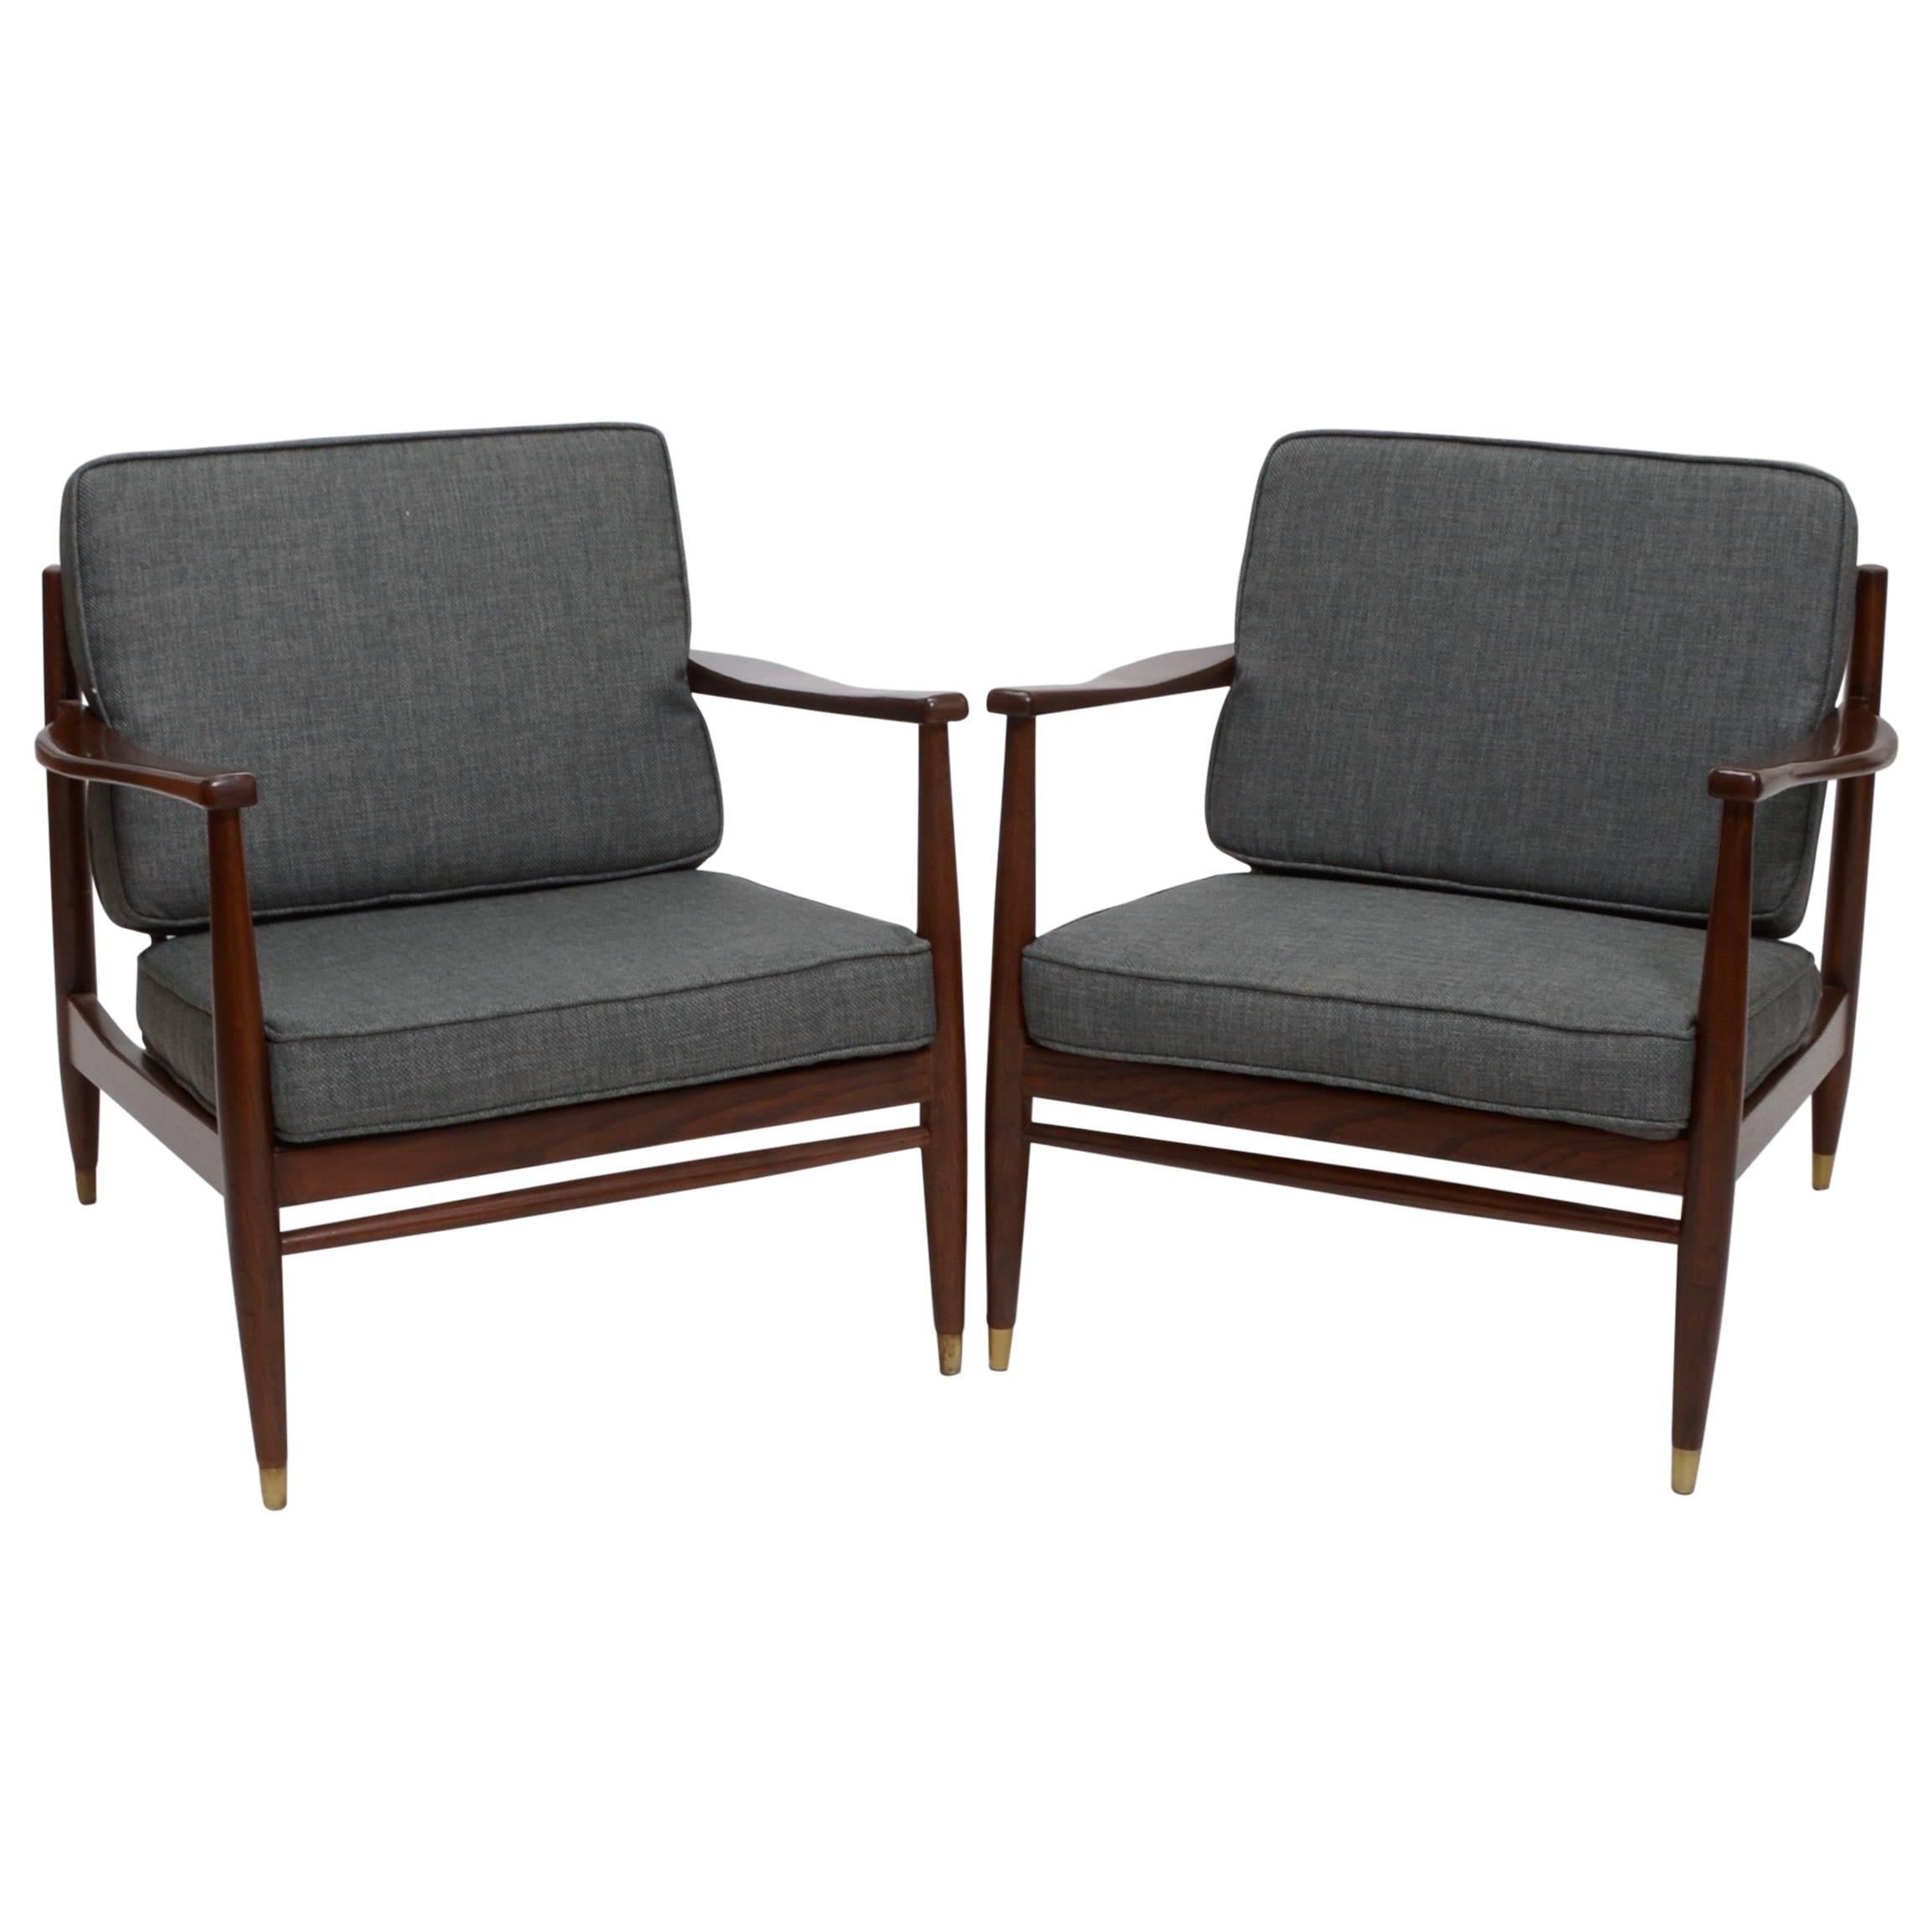 Pair of American Modern Armchairs in the Style of Grete Jalk